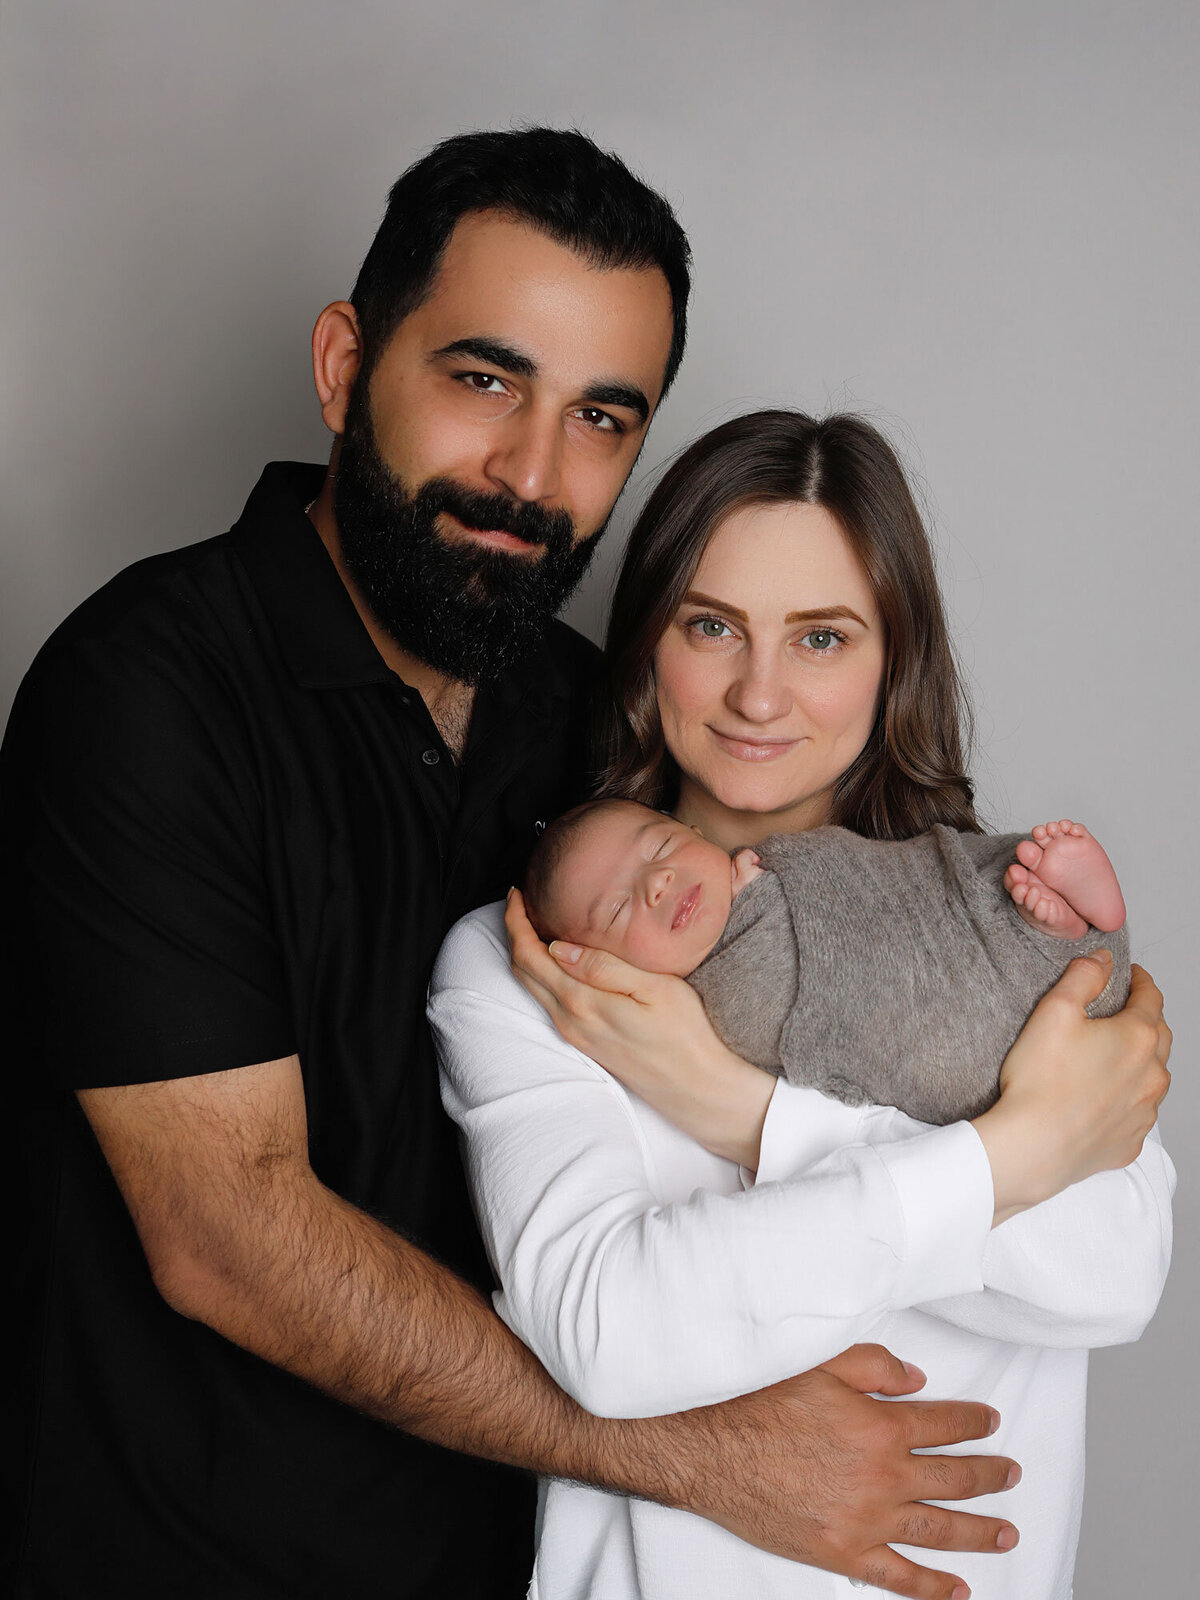 Newborn-photography-session-newborn-in-mothers-arm-with-father,-newborn-photo,-photo-taken-by-Janina-Botha-photographer-in-Oakville-Ontario